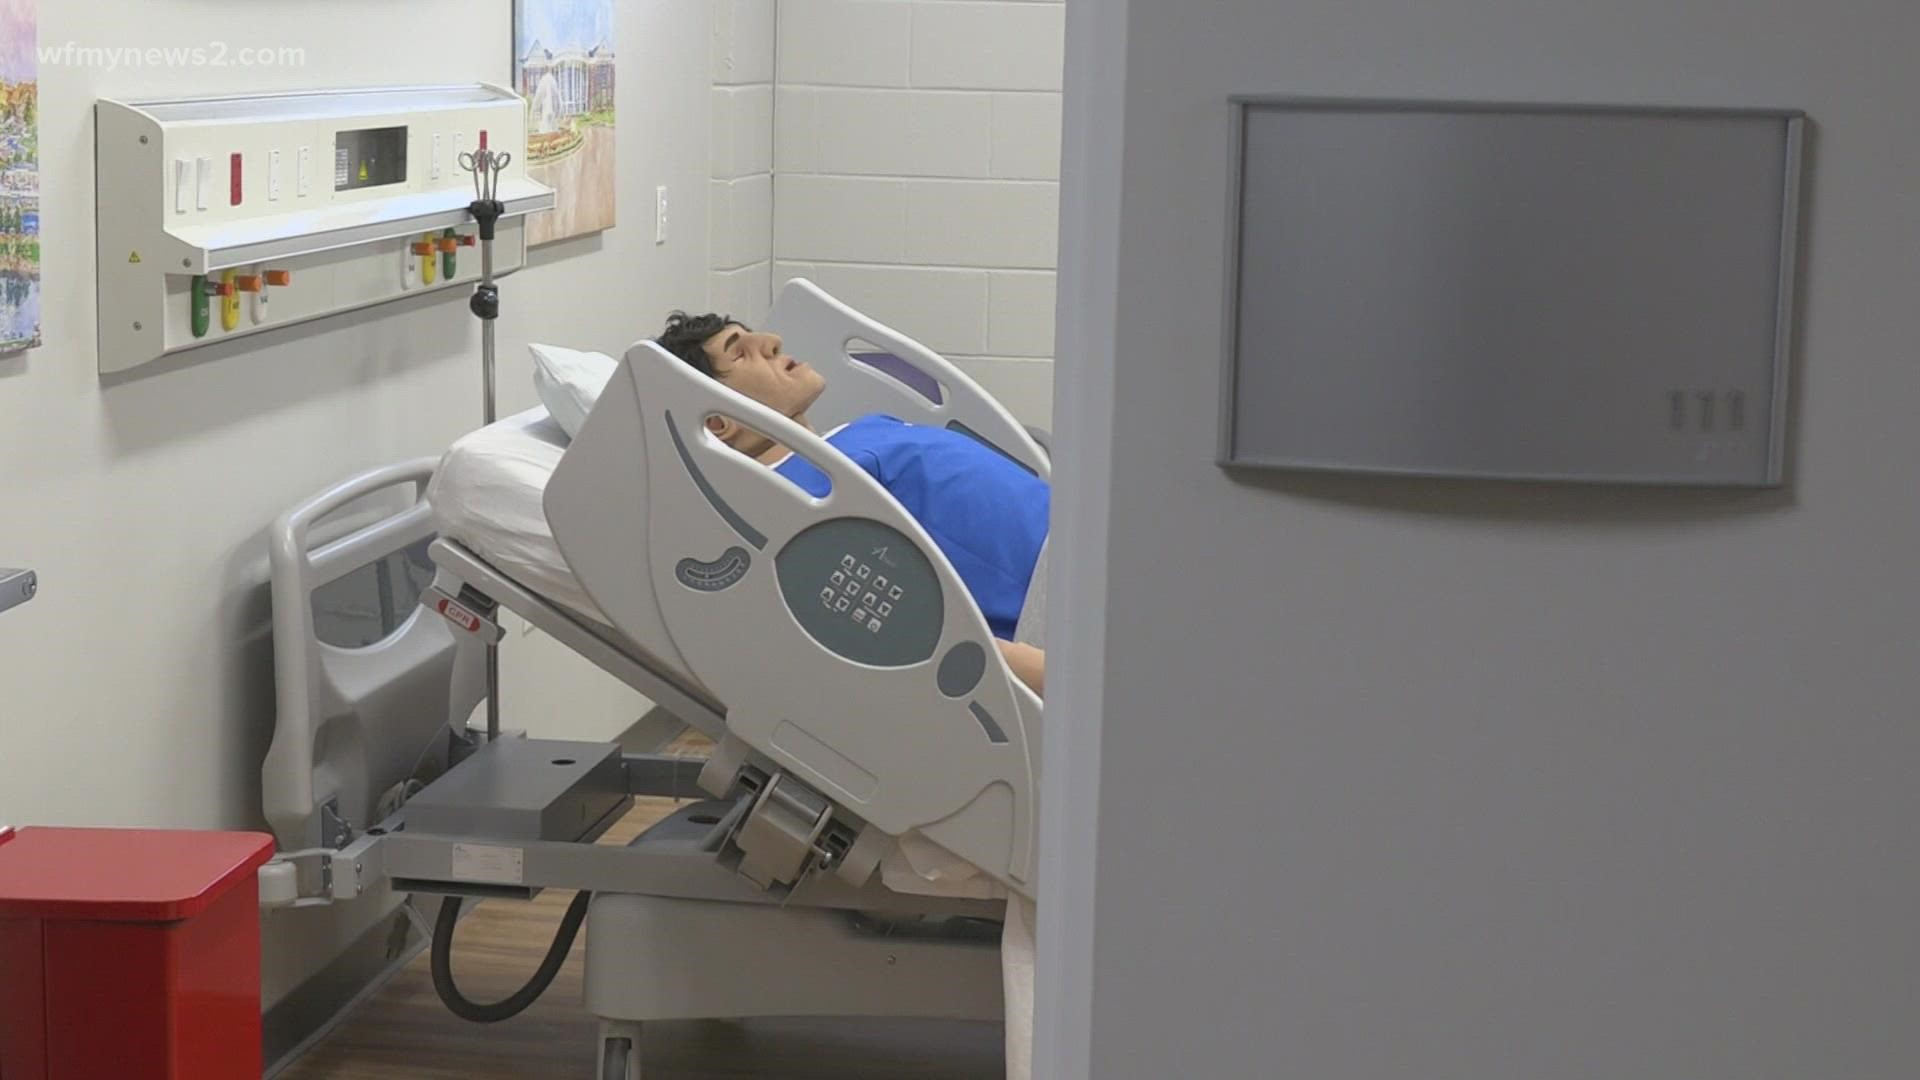 High Point University is starting its first Bachelor of Science degree program for nursing.